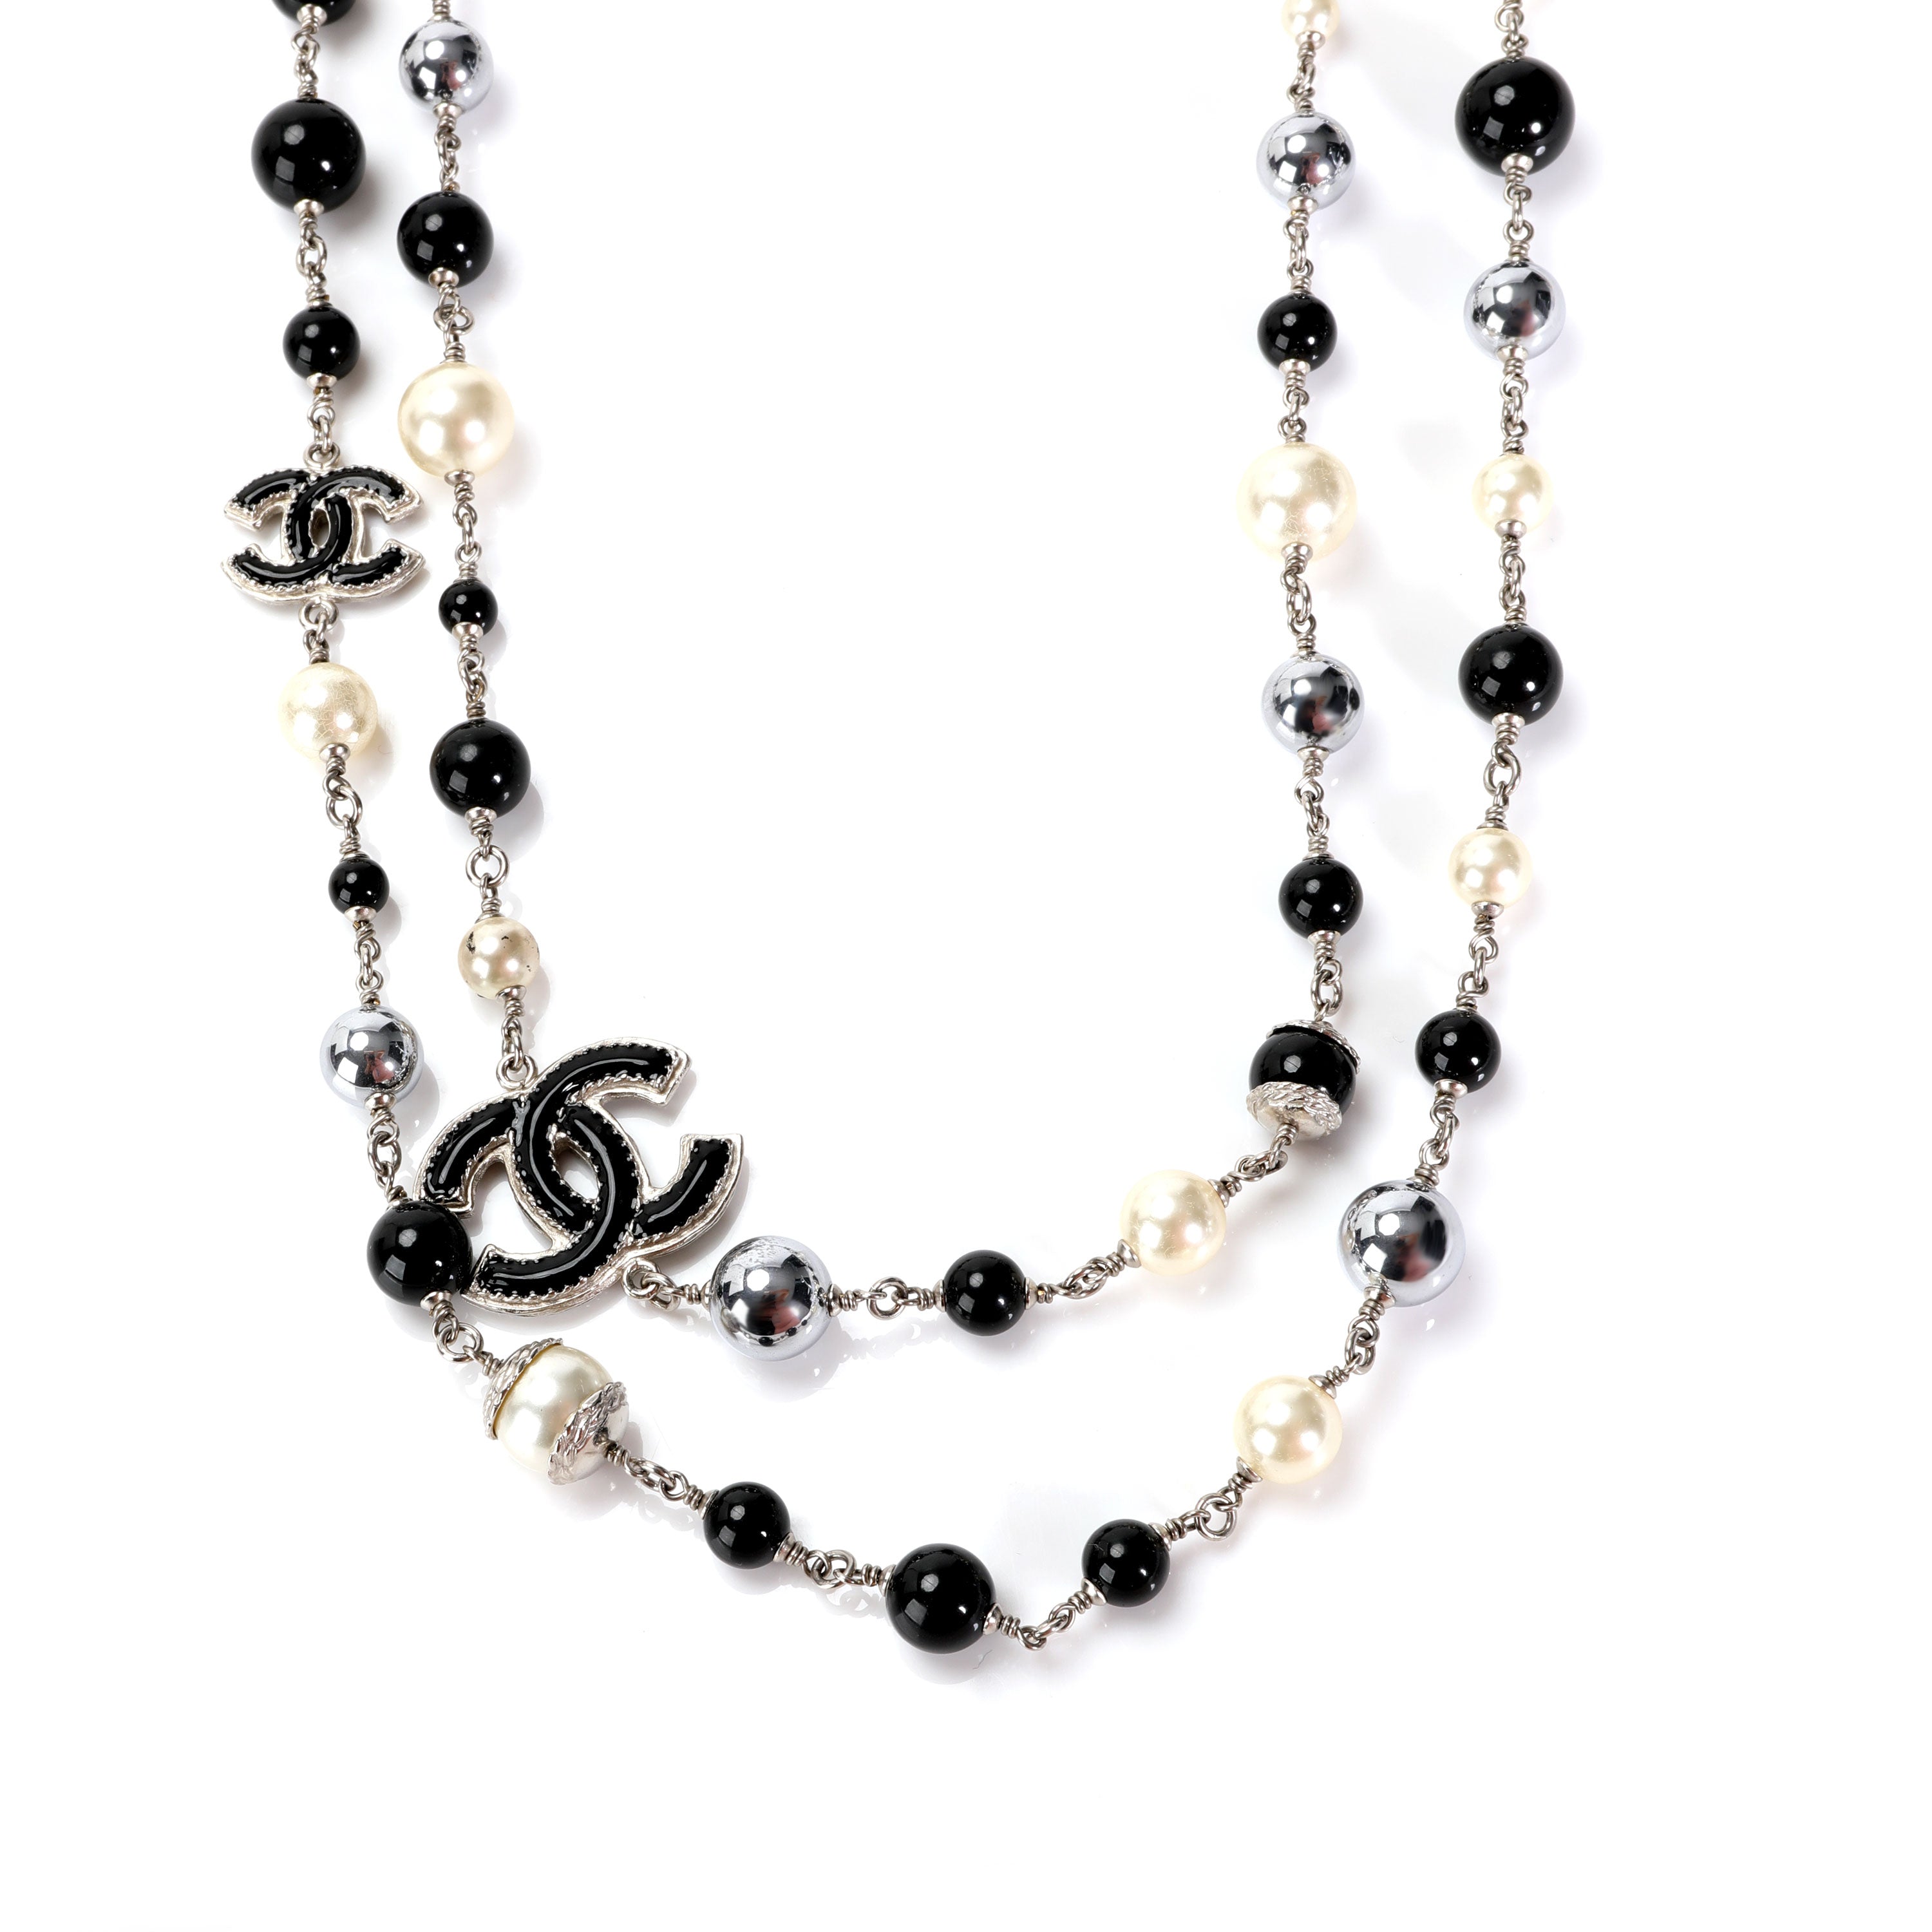 Chanel Black and White Bead Necklace With CC Logo